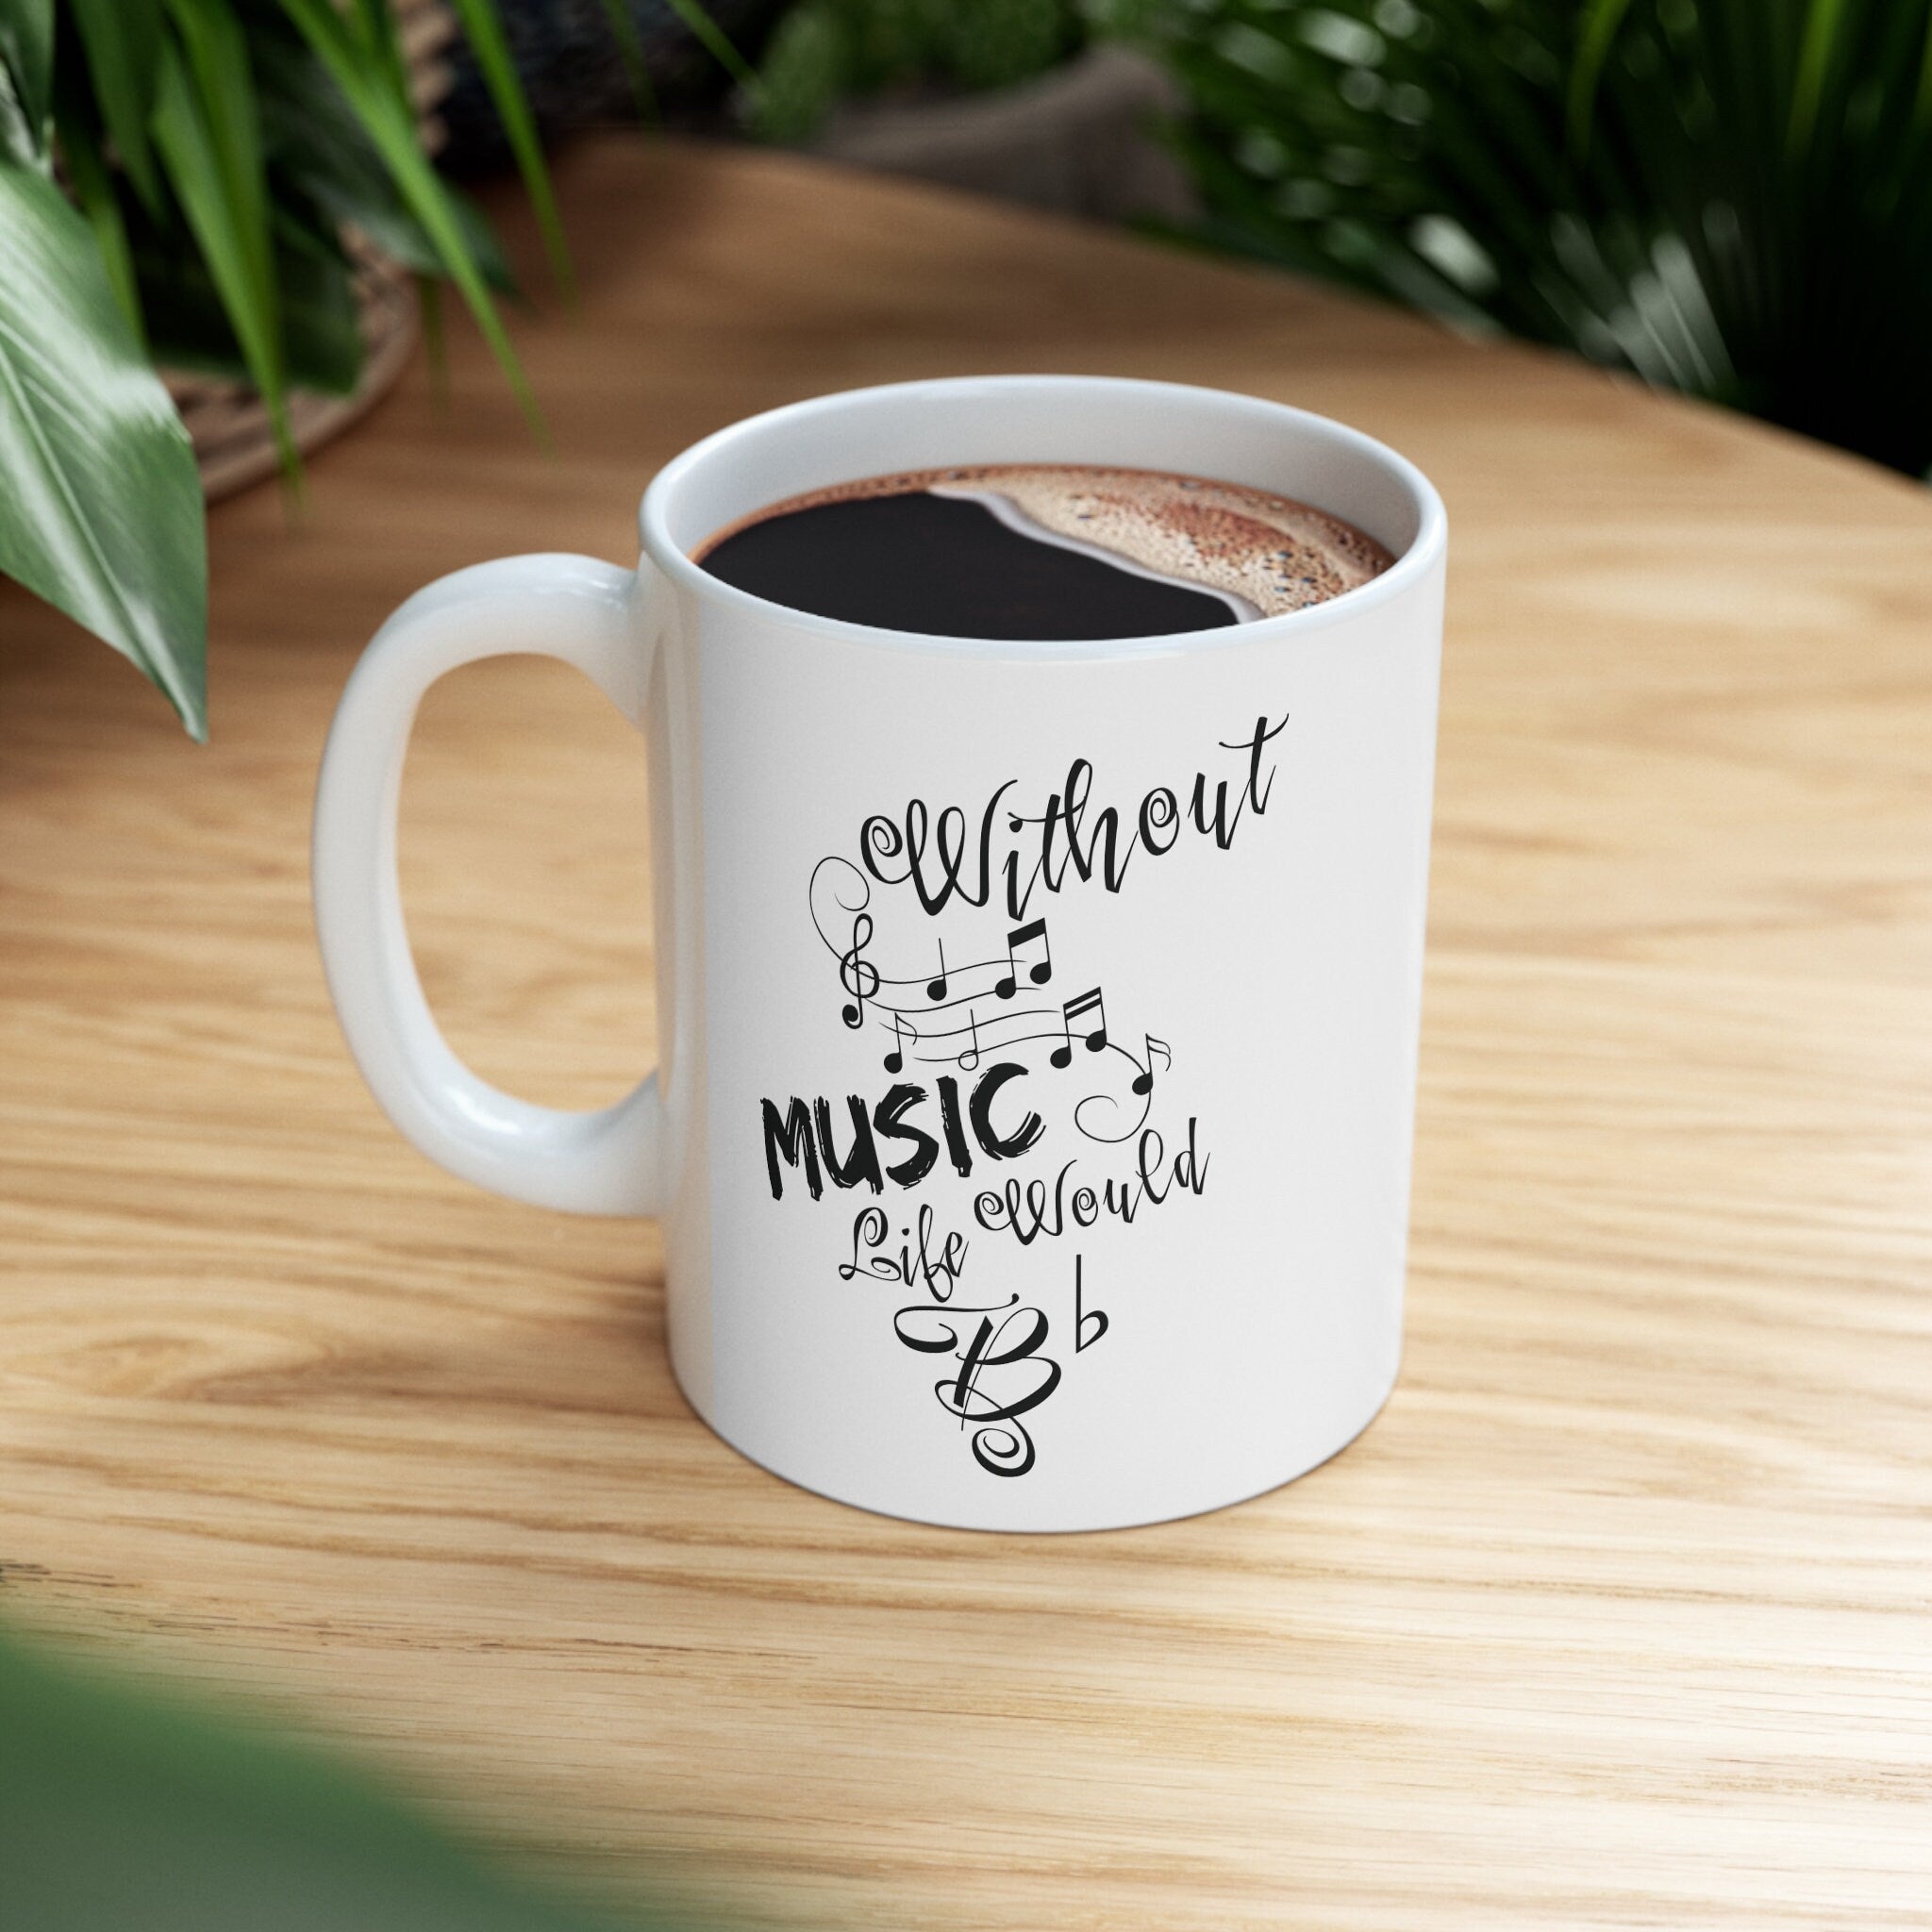 Life Without Music Ceramic Mug | 11oz White Coffee Cup | Musical Note Graphic Design